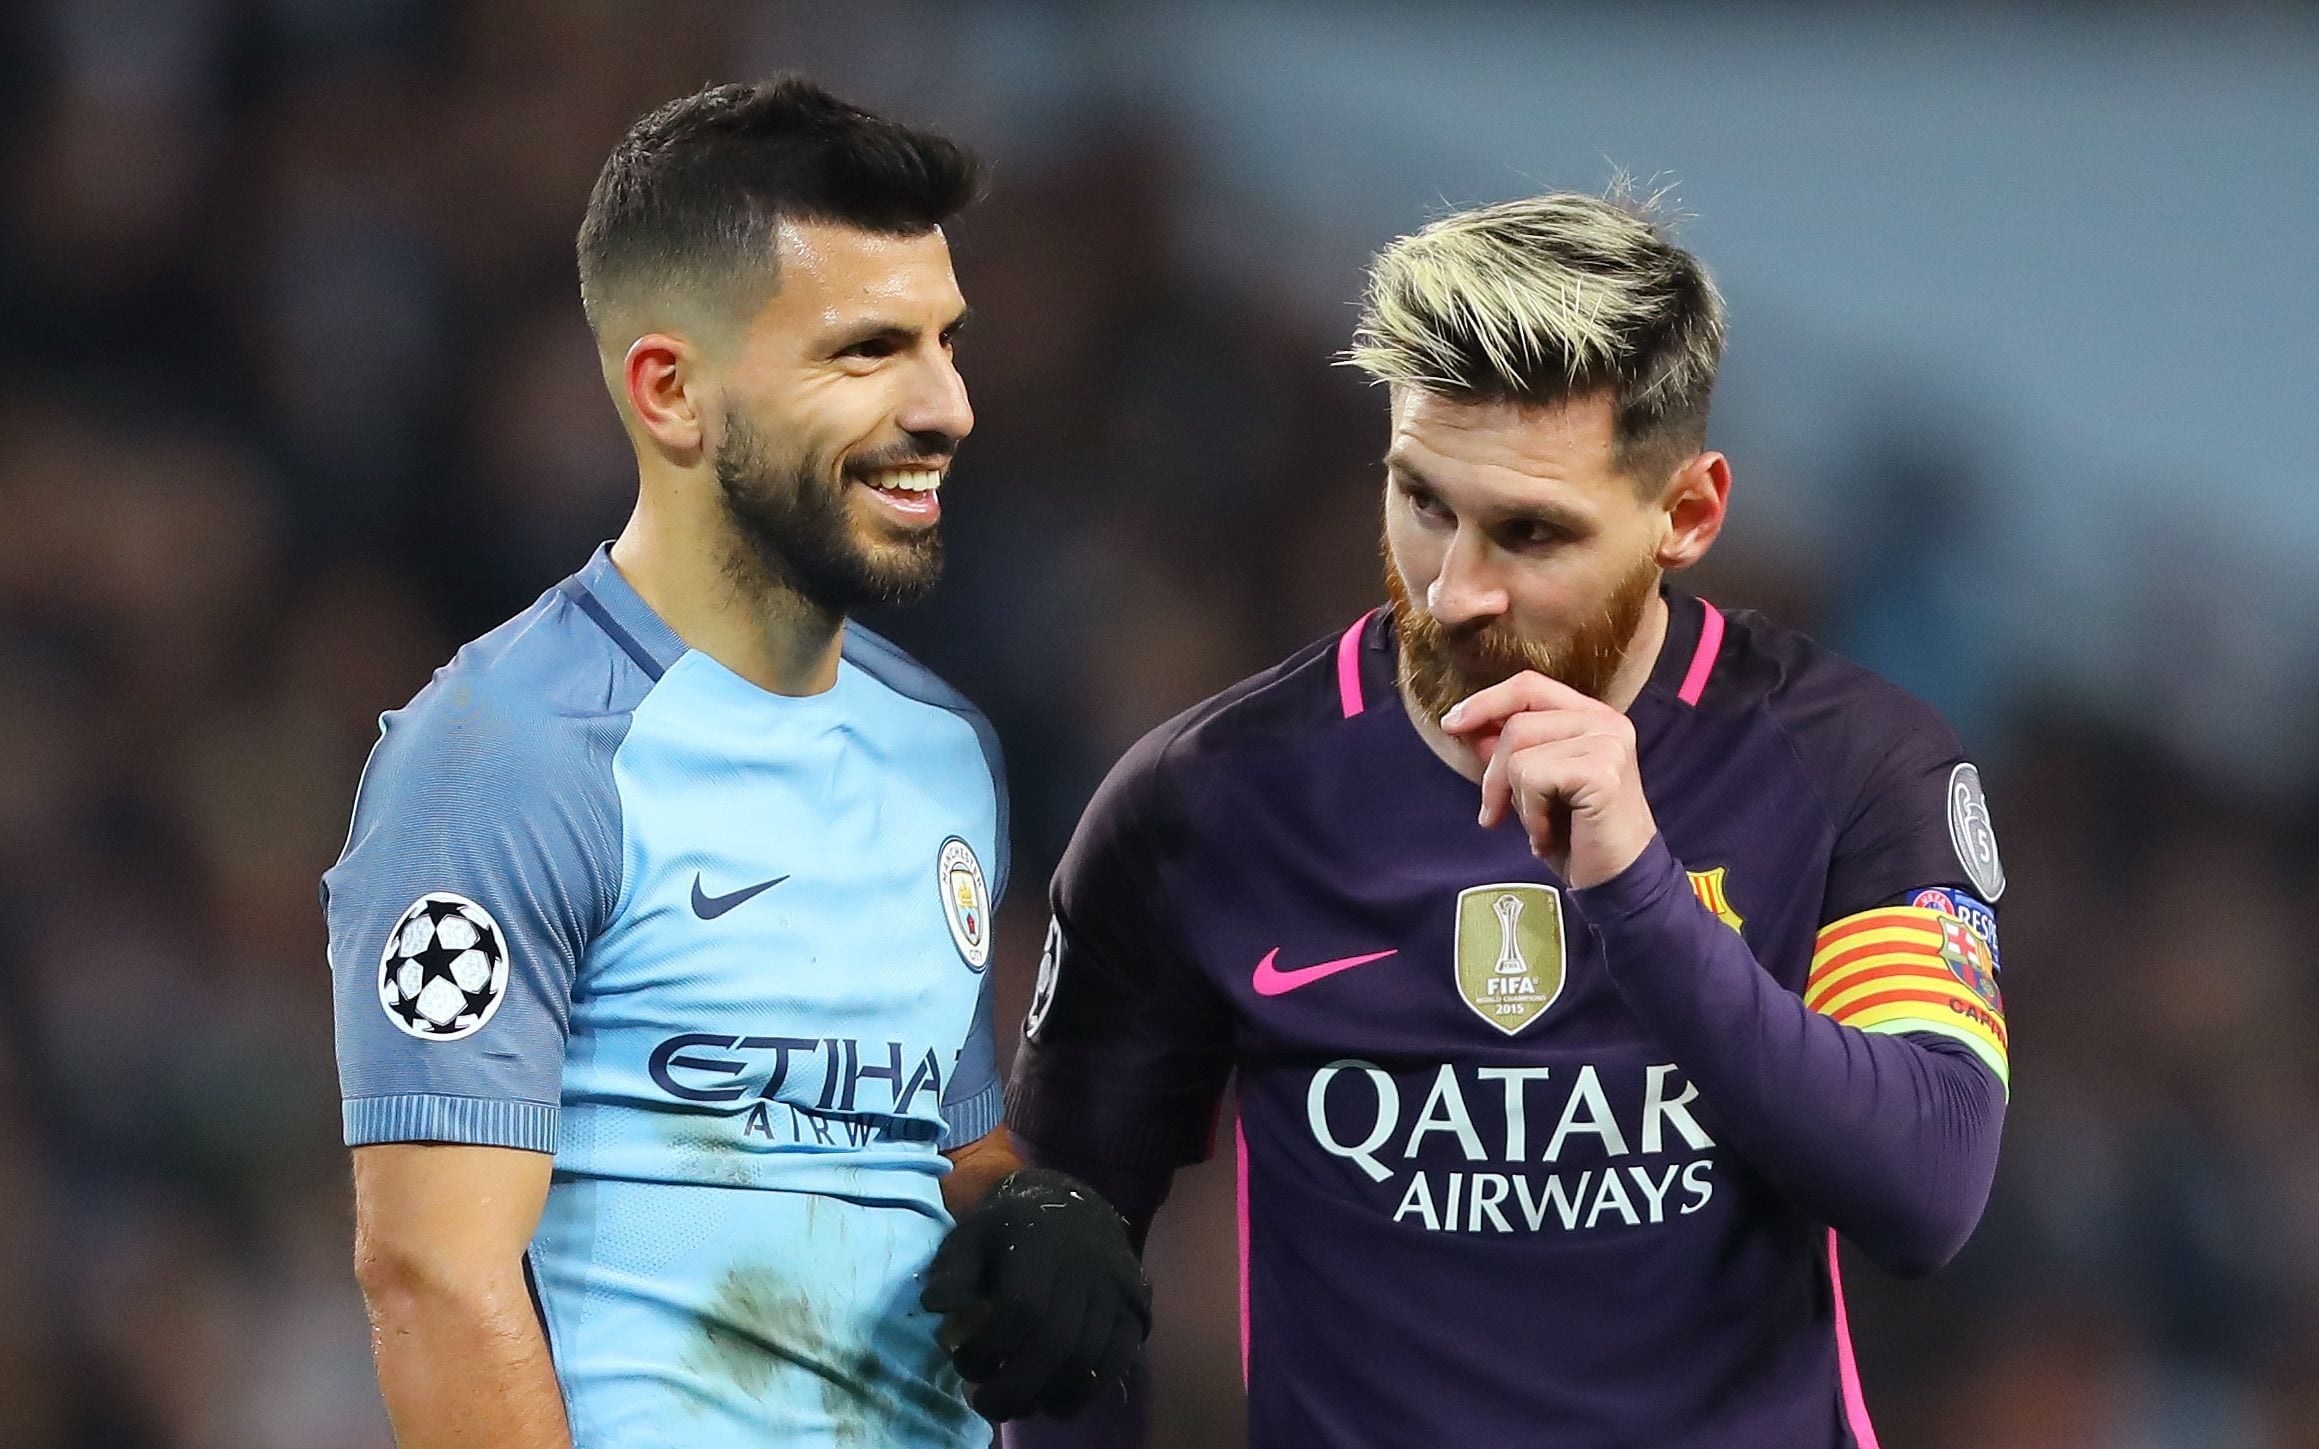 Aguero and Messi